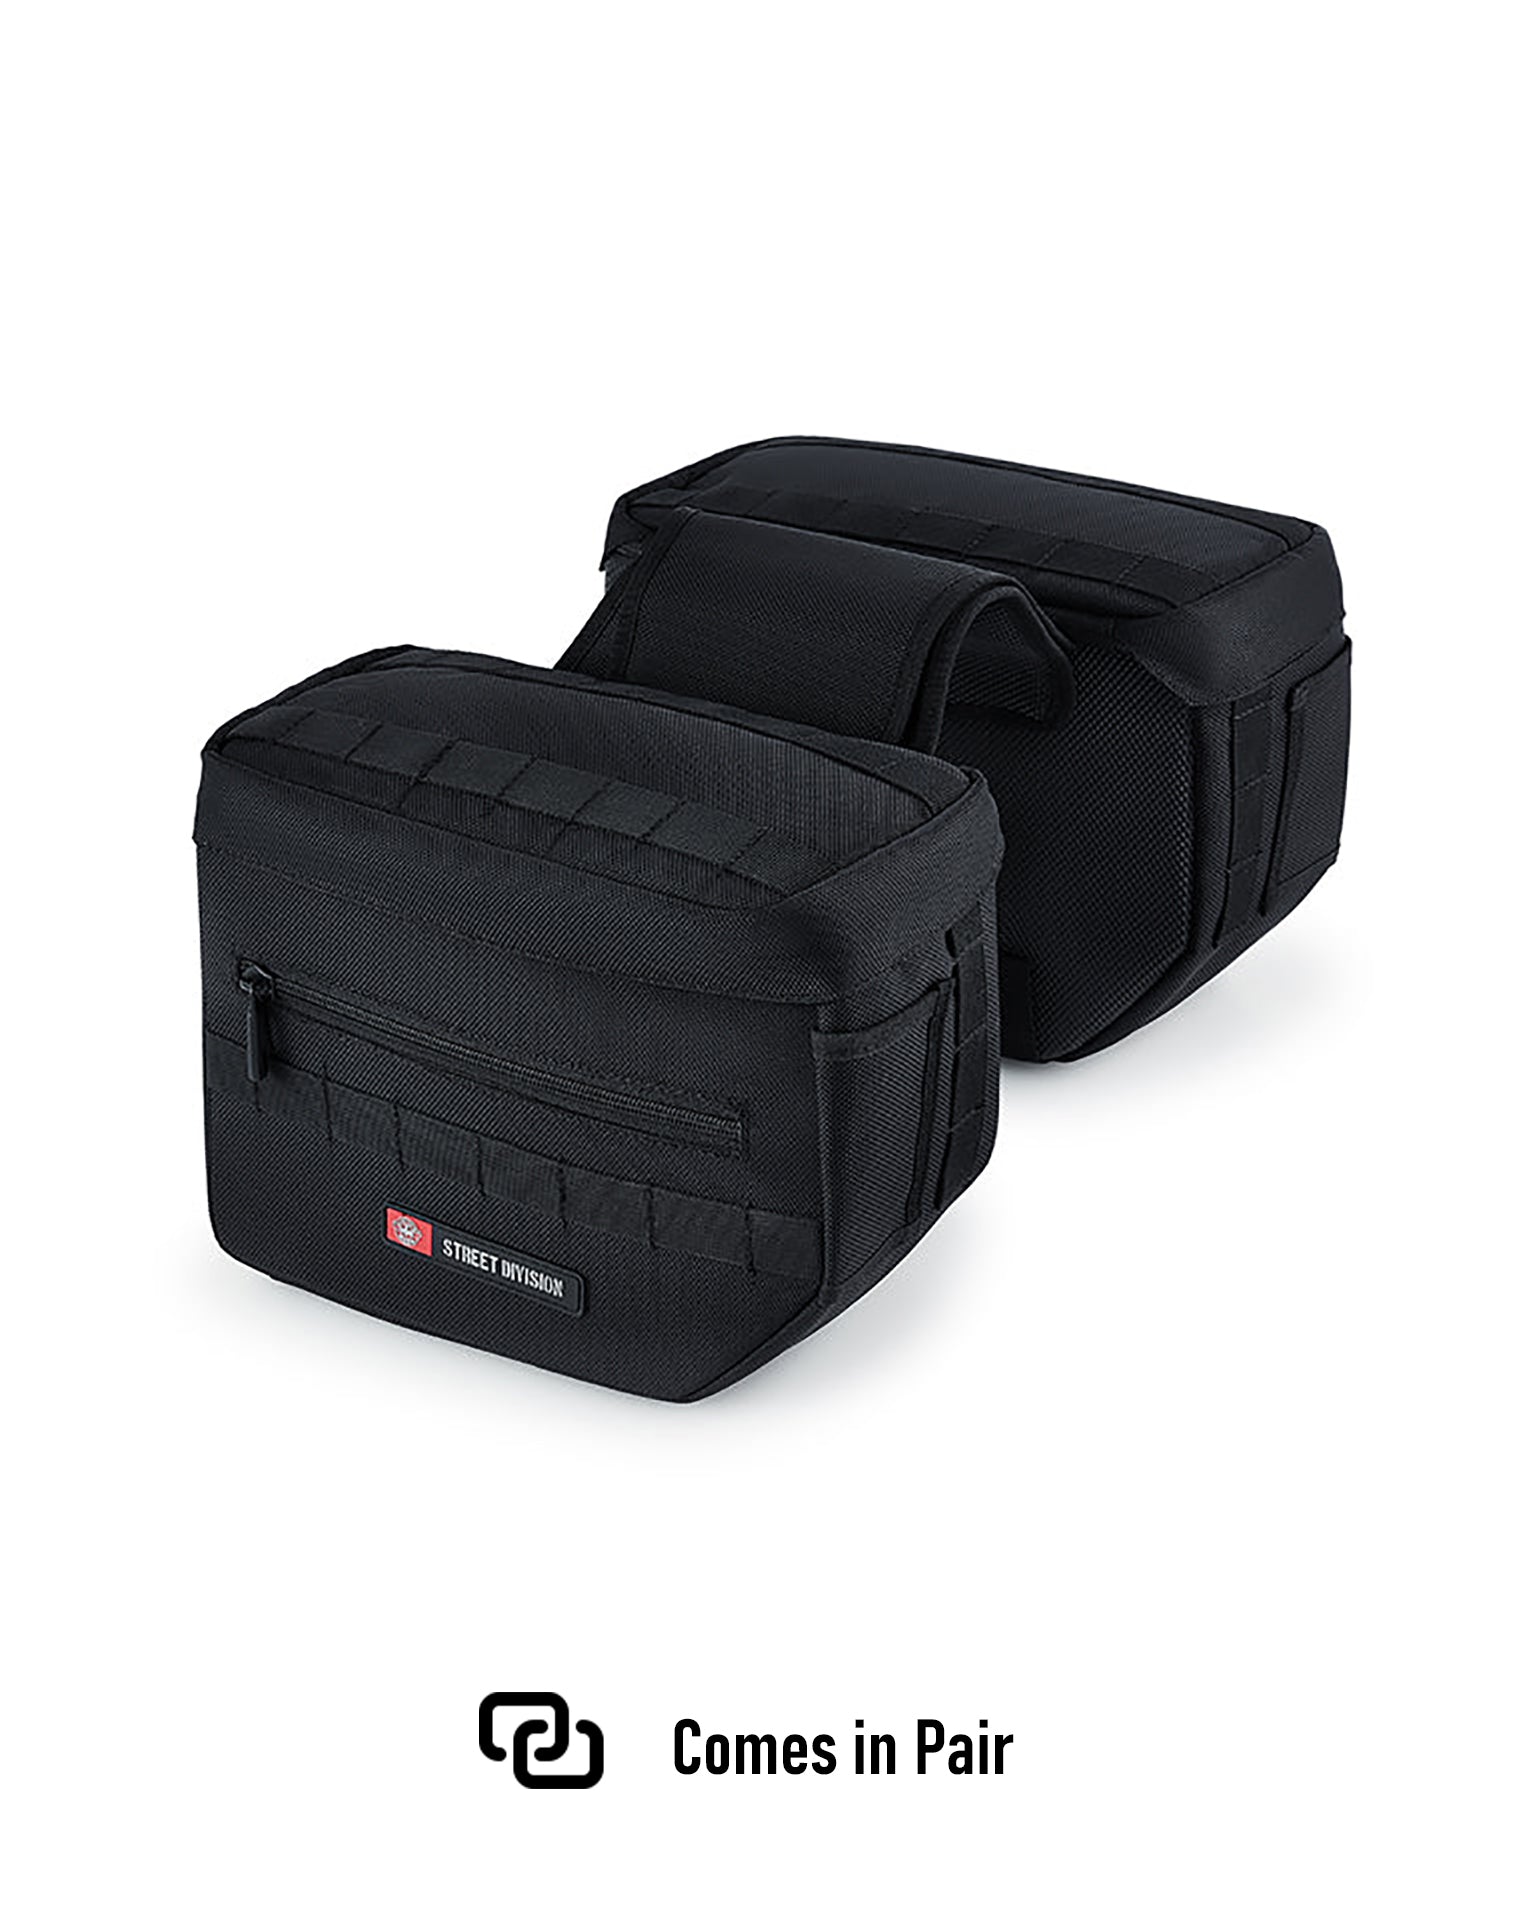 Viking Patriot Small Kawasaki Vulcan 750 Vn750 Motorcycle Throw Over Saddlebags Weather Resistant Bags Comes in Pair